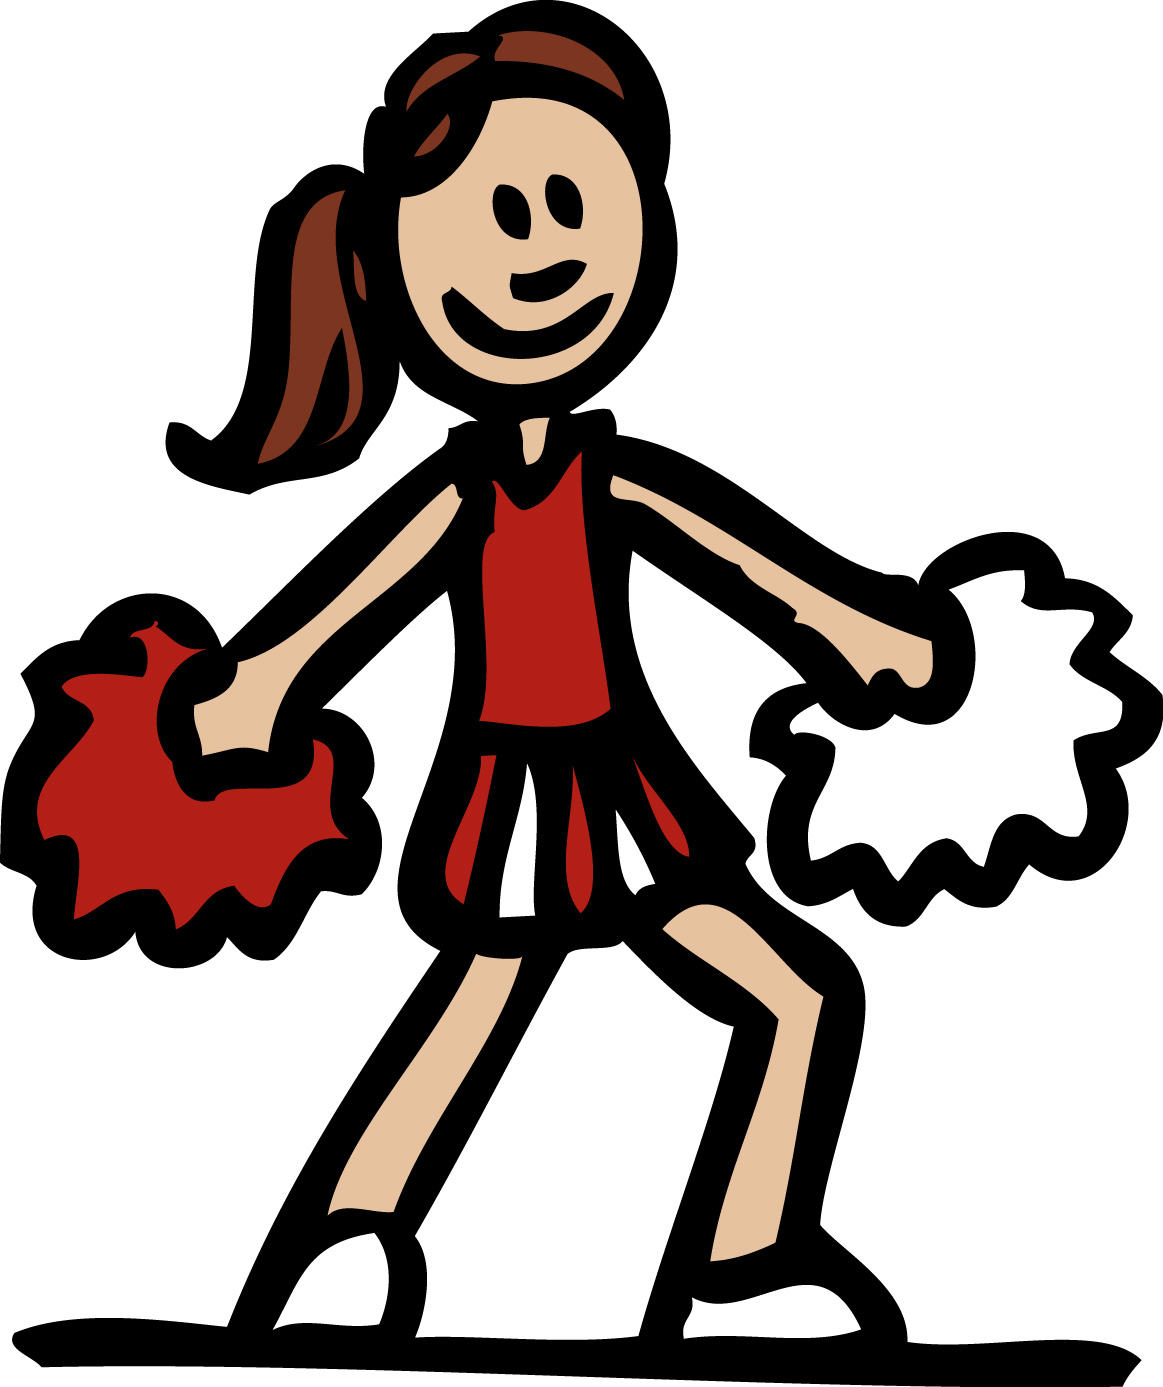 Clipart Of Cheerleaders - Clipart library